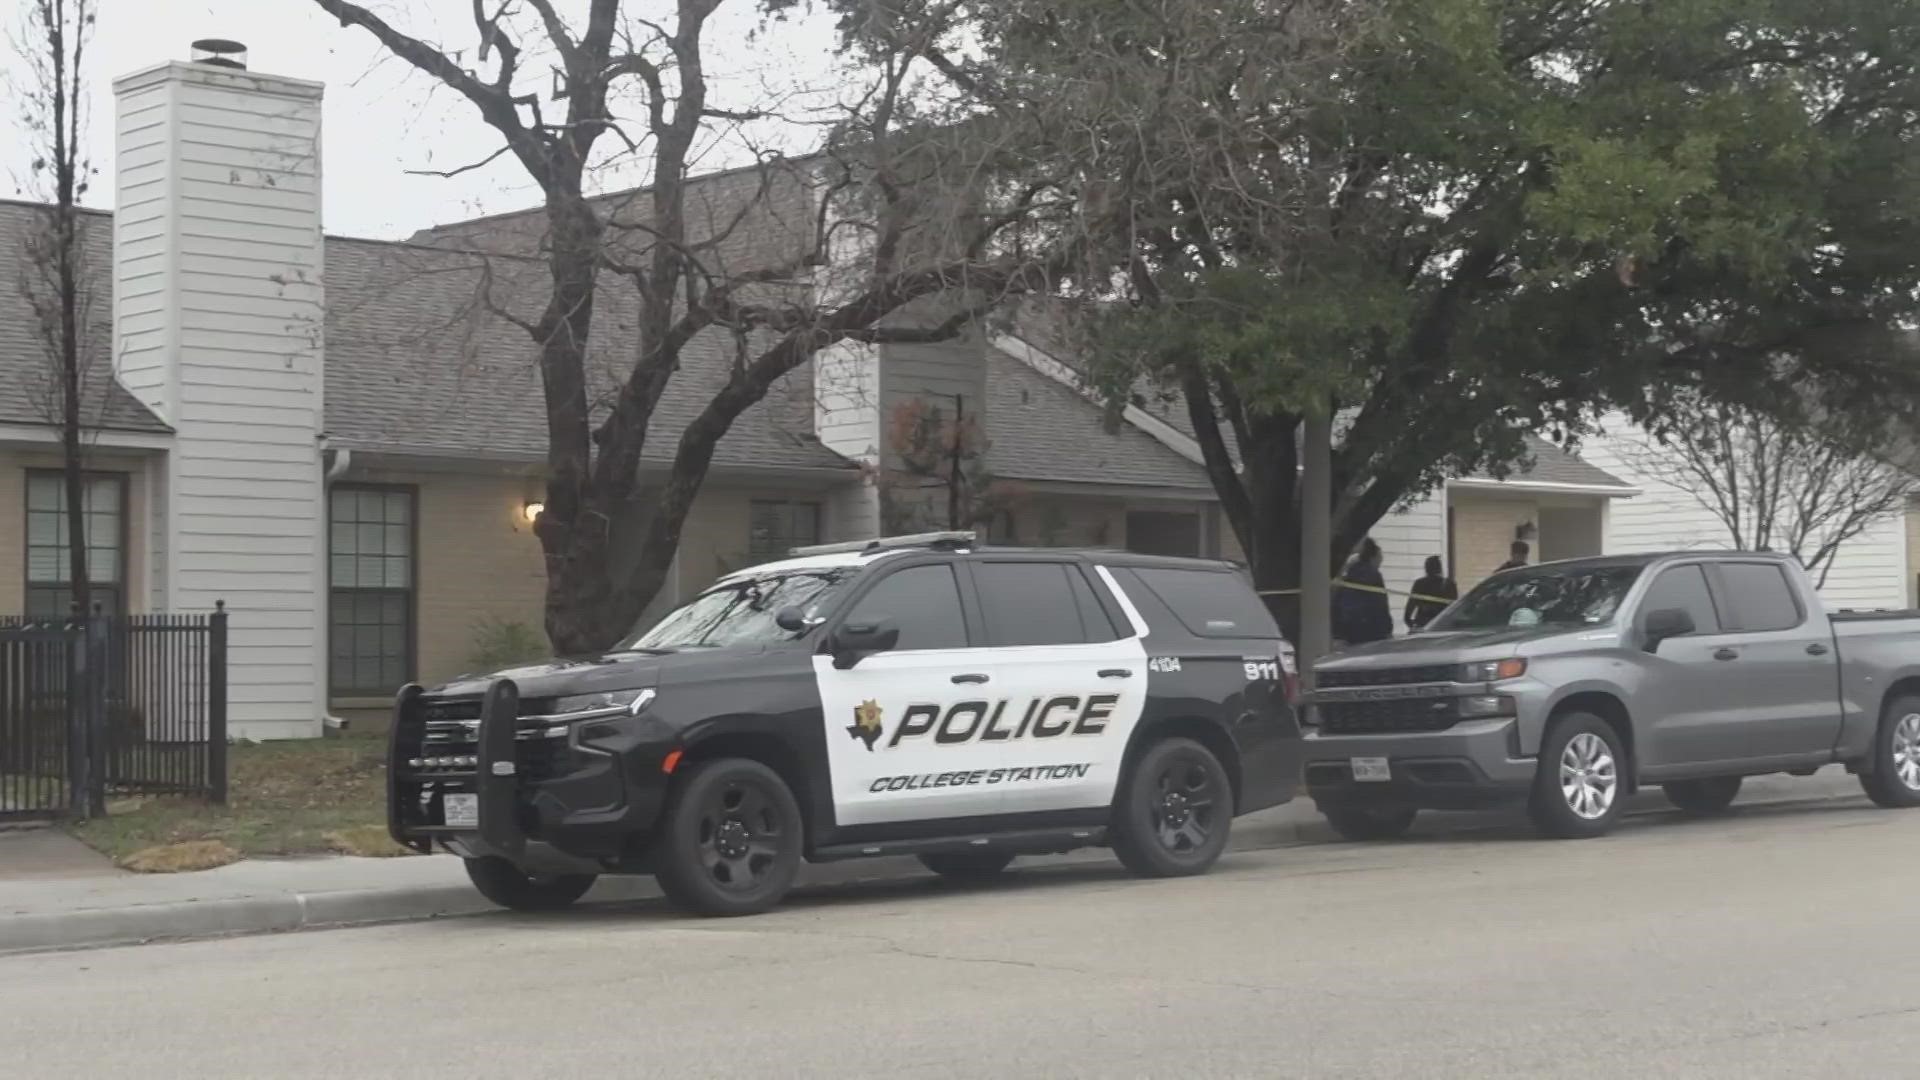 One dead following officer-involved shooting in College Station, police say